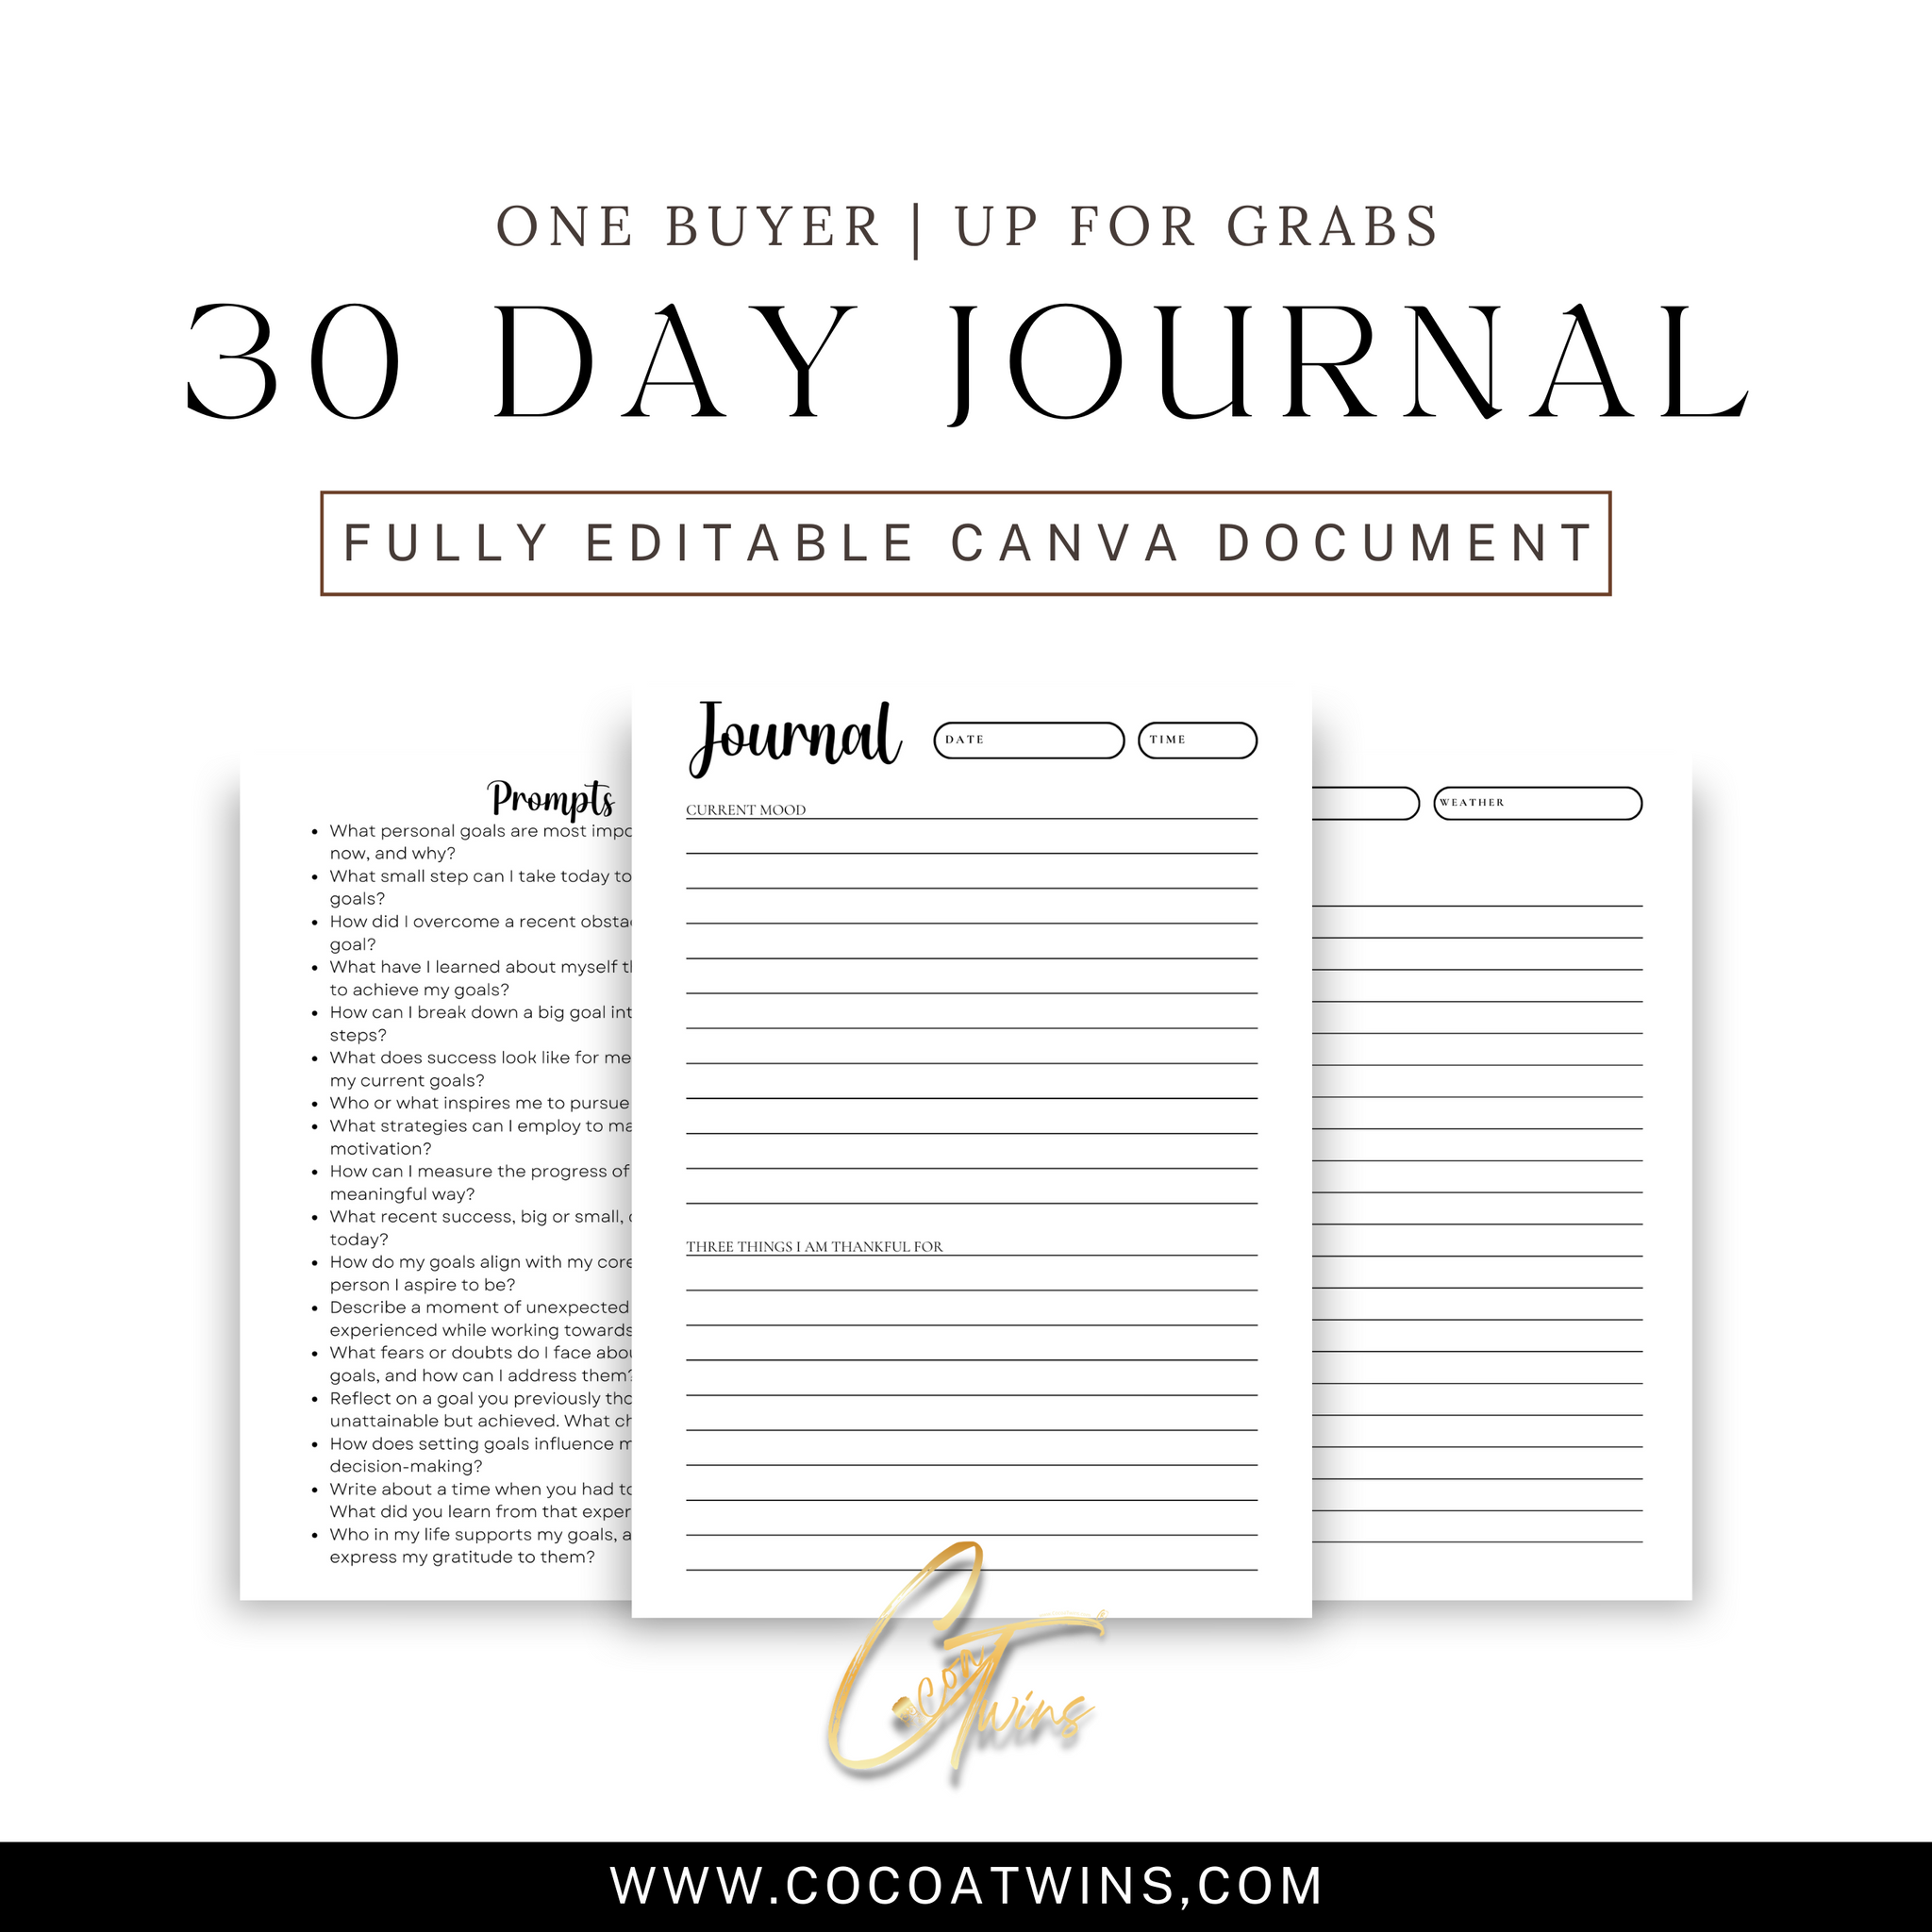 Goals in Focus - A Journey of Achievement - EB | One Buyer 30 Day Prompt Journal